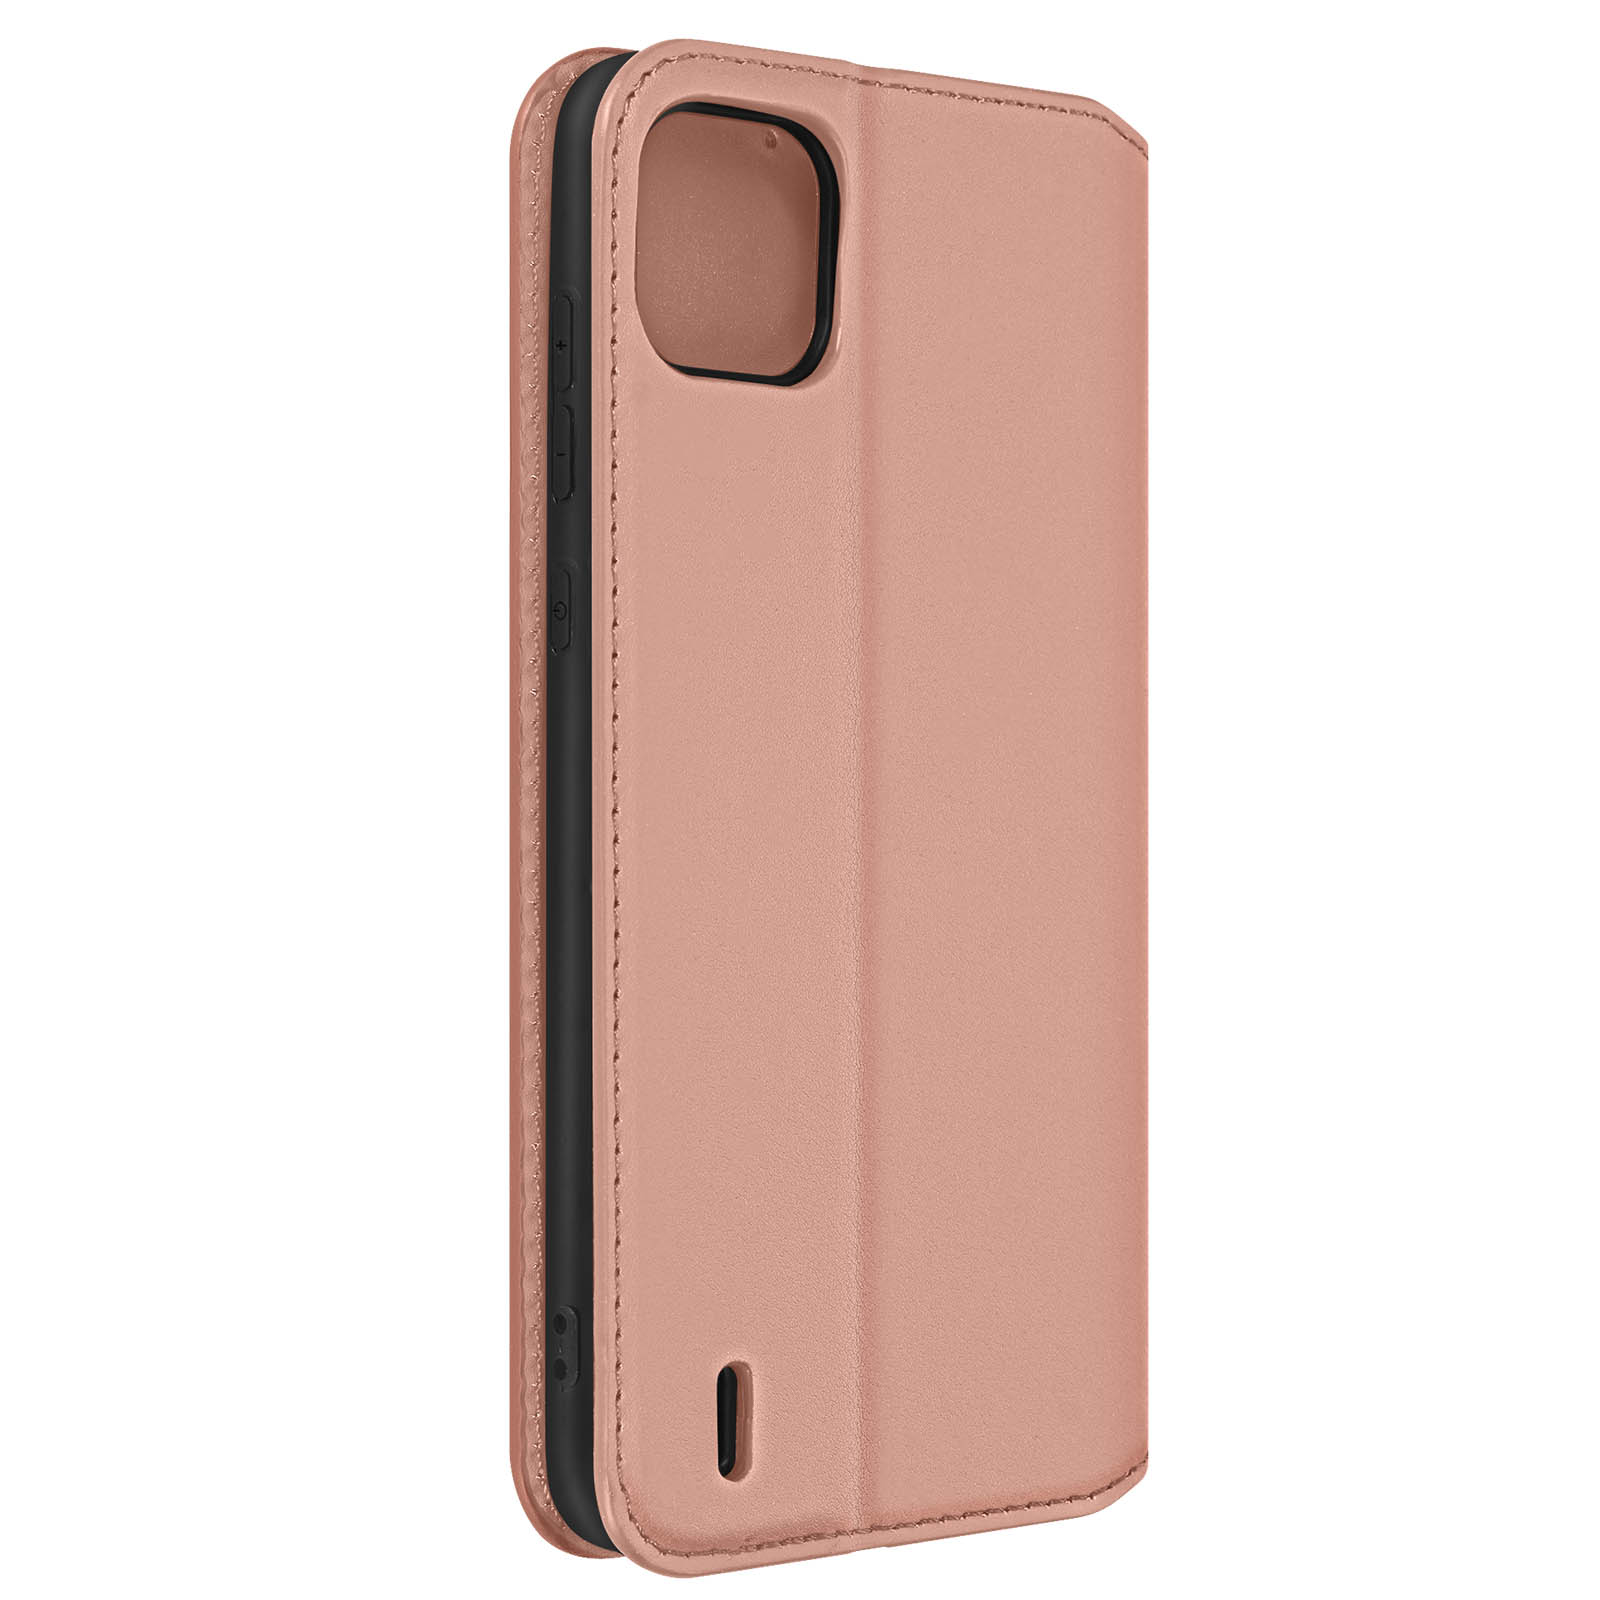 AVIZAR Classic Edition, Backcover mit Wiko, Y82, Bookcover, Magnetklappe Series, Wiko Rosegold